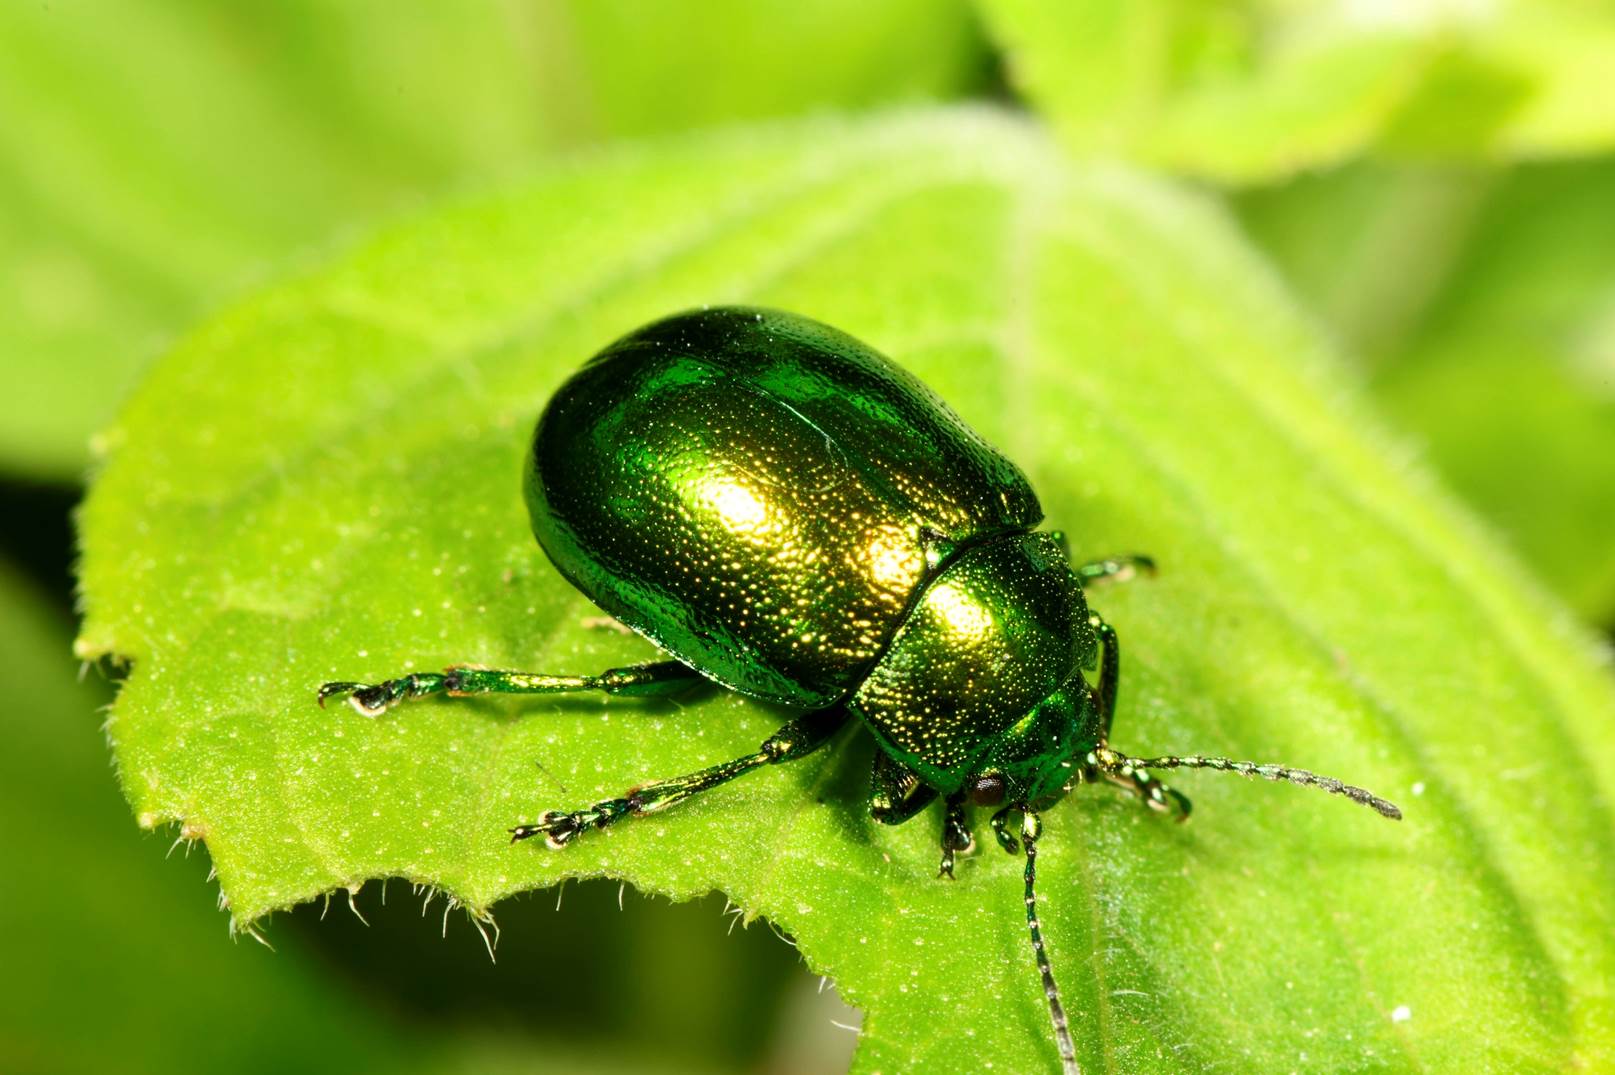 A green bug on a leaf

Description automatically generated with medium confidence